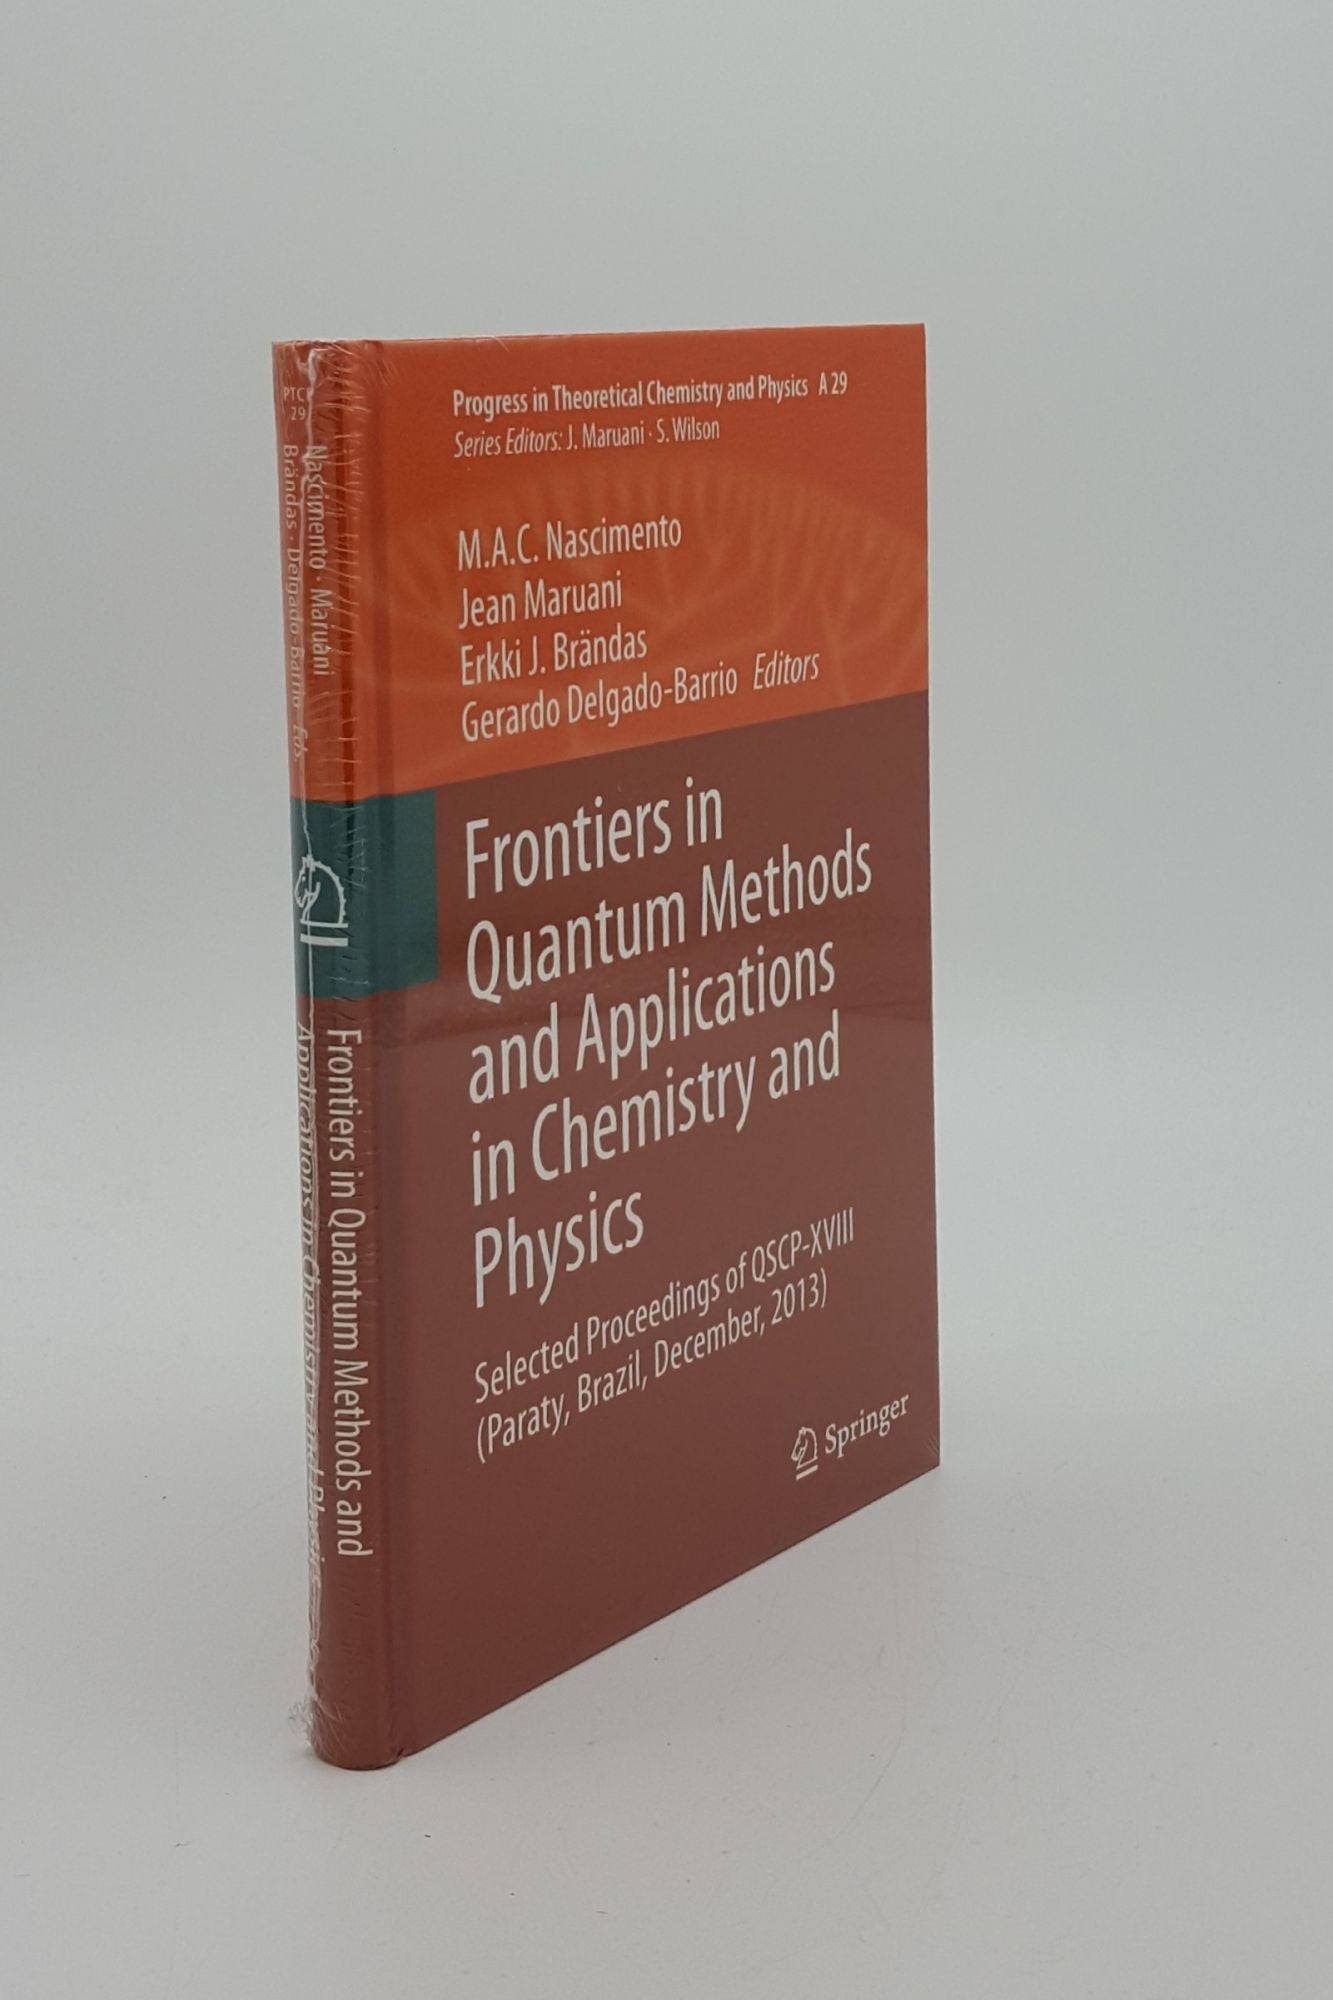 NASCIMENTO Marco Antonio, MARUANI Jean BRANDAS Erkki J. - Frontiers in Quantum Methods and Applications in Chemistry and Physics Selected Proceedings of Qscp-XVIII (Paraty Brazil December 2013) (Progress in Theoretical Chemistry and Physics)